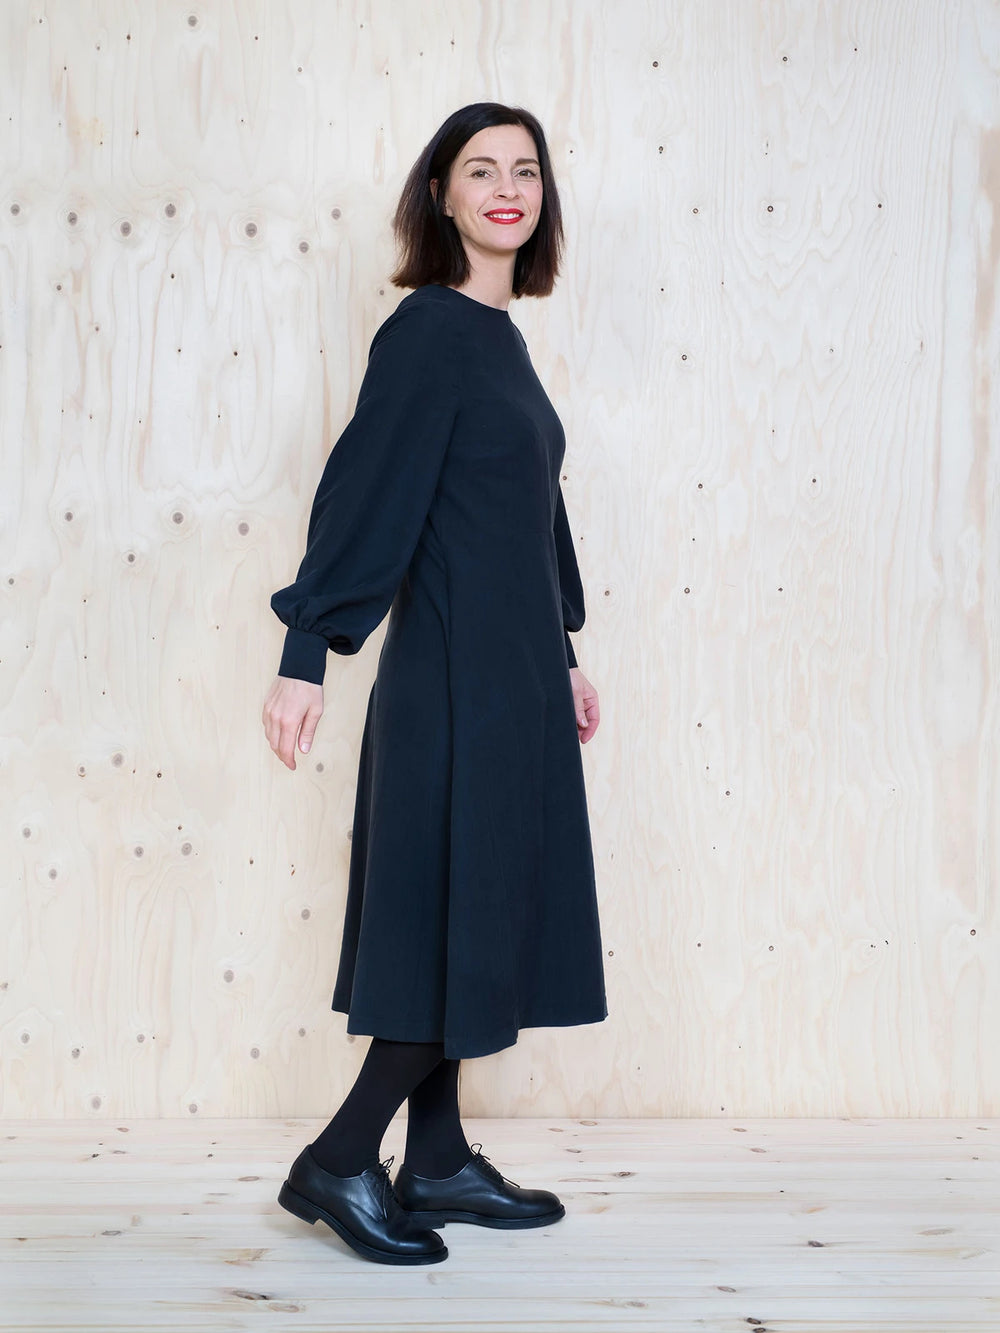 Woman wearing the Multi-Sleeve Midi Dress sewing pattern by The Assembly Line. A dress pattern made in light to medium weight fabrics such as, cotton, tencel, silk, linen, crepe de chine or wool crepe fabrics, featuring an A-line silhouette, round neck, c